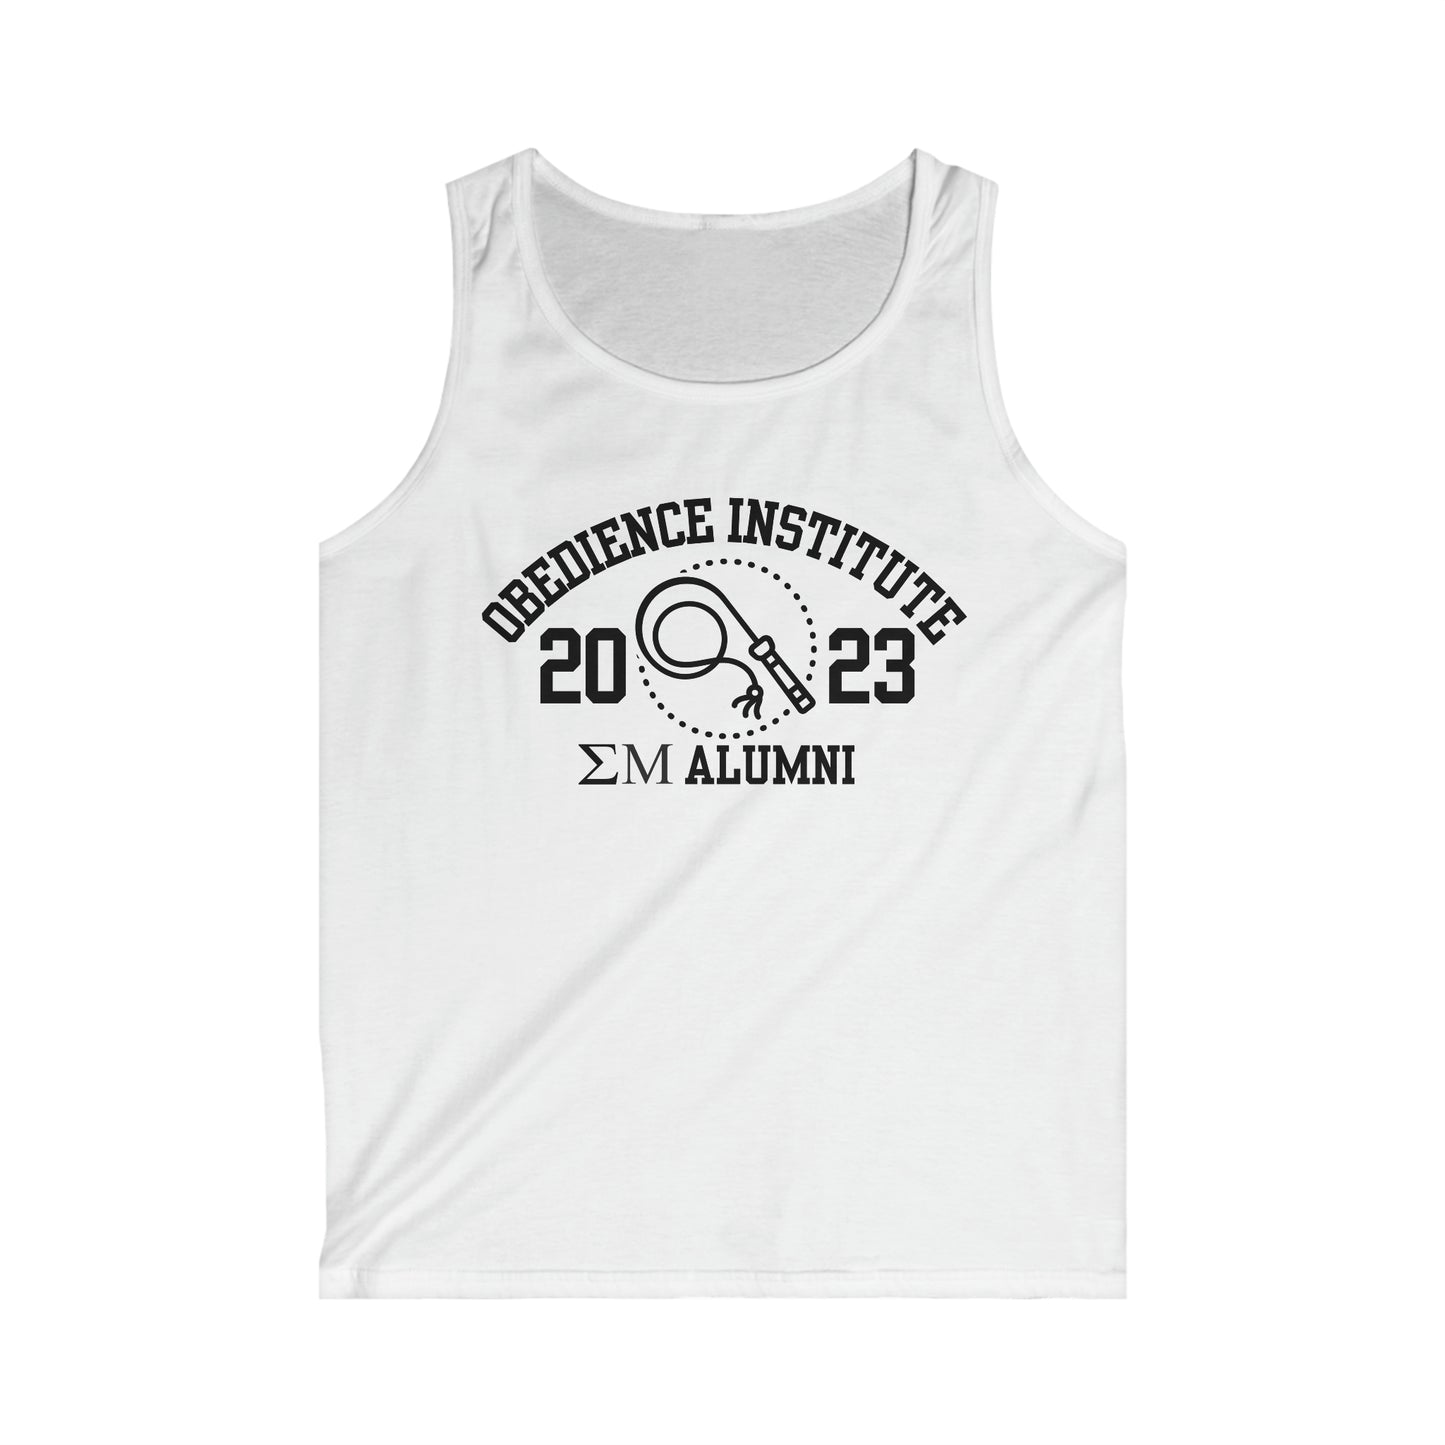 Obedience Institute BDSM Men's Softstyle Tank Top